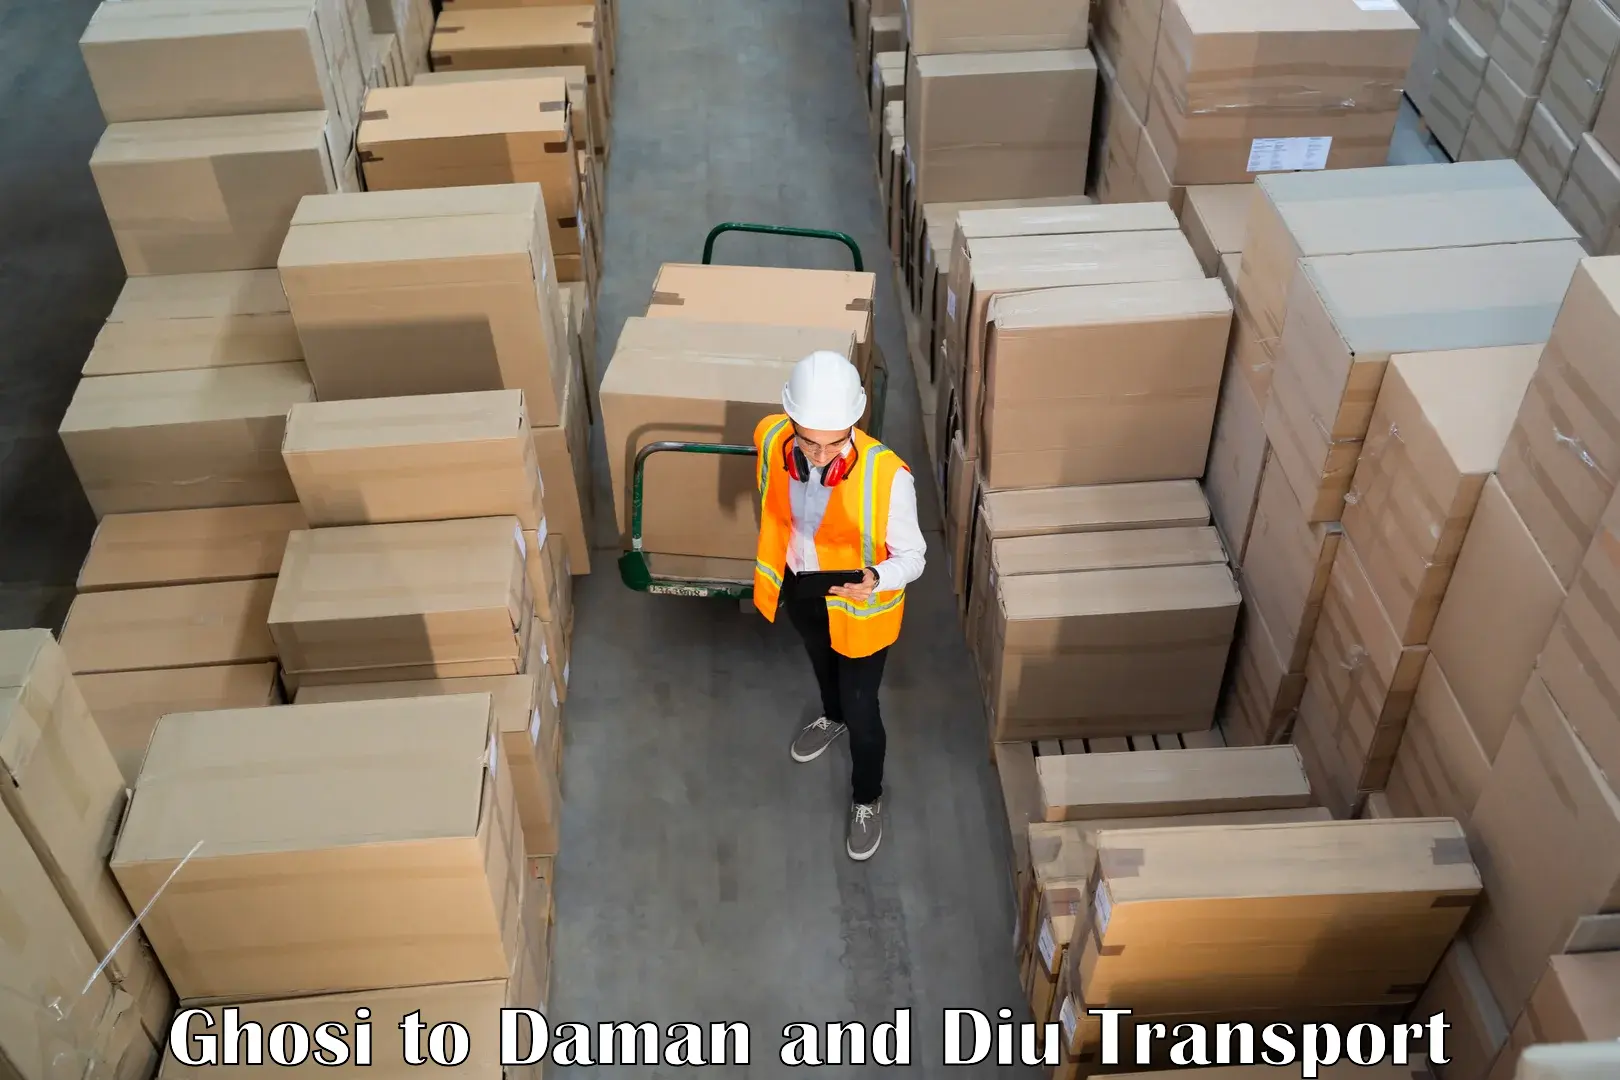 Daily parcel service transport Ghosi to Diu